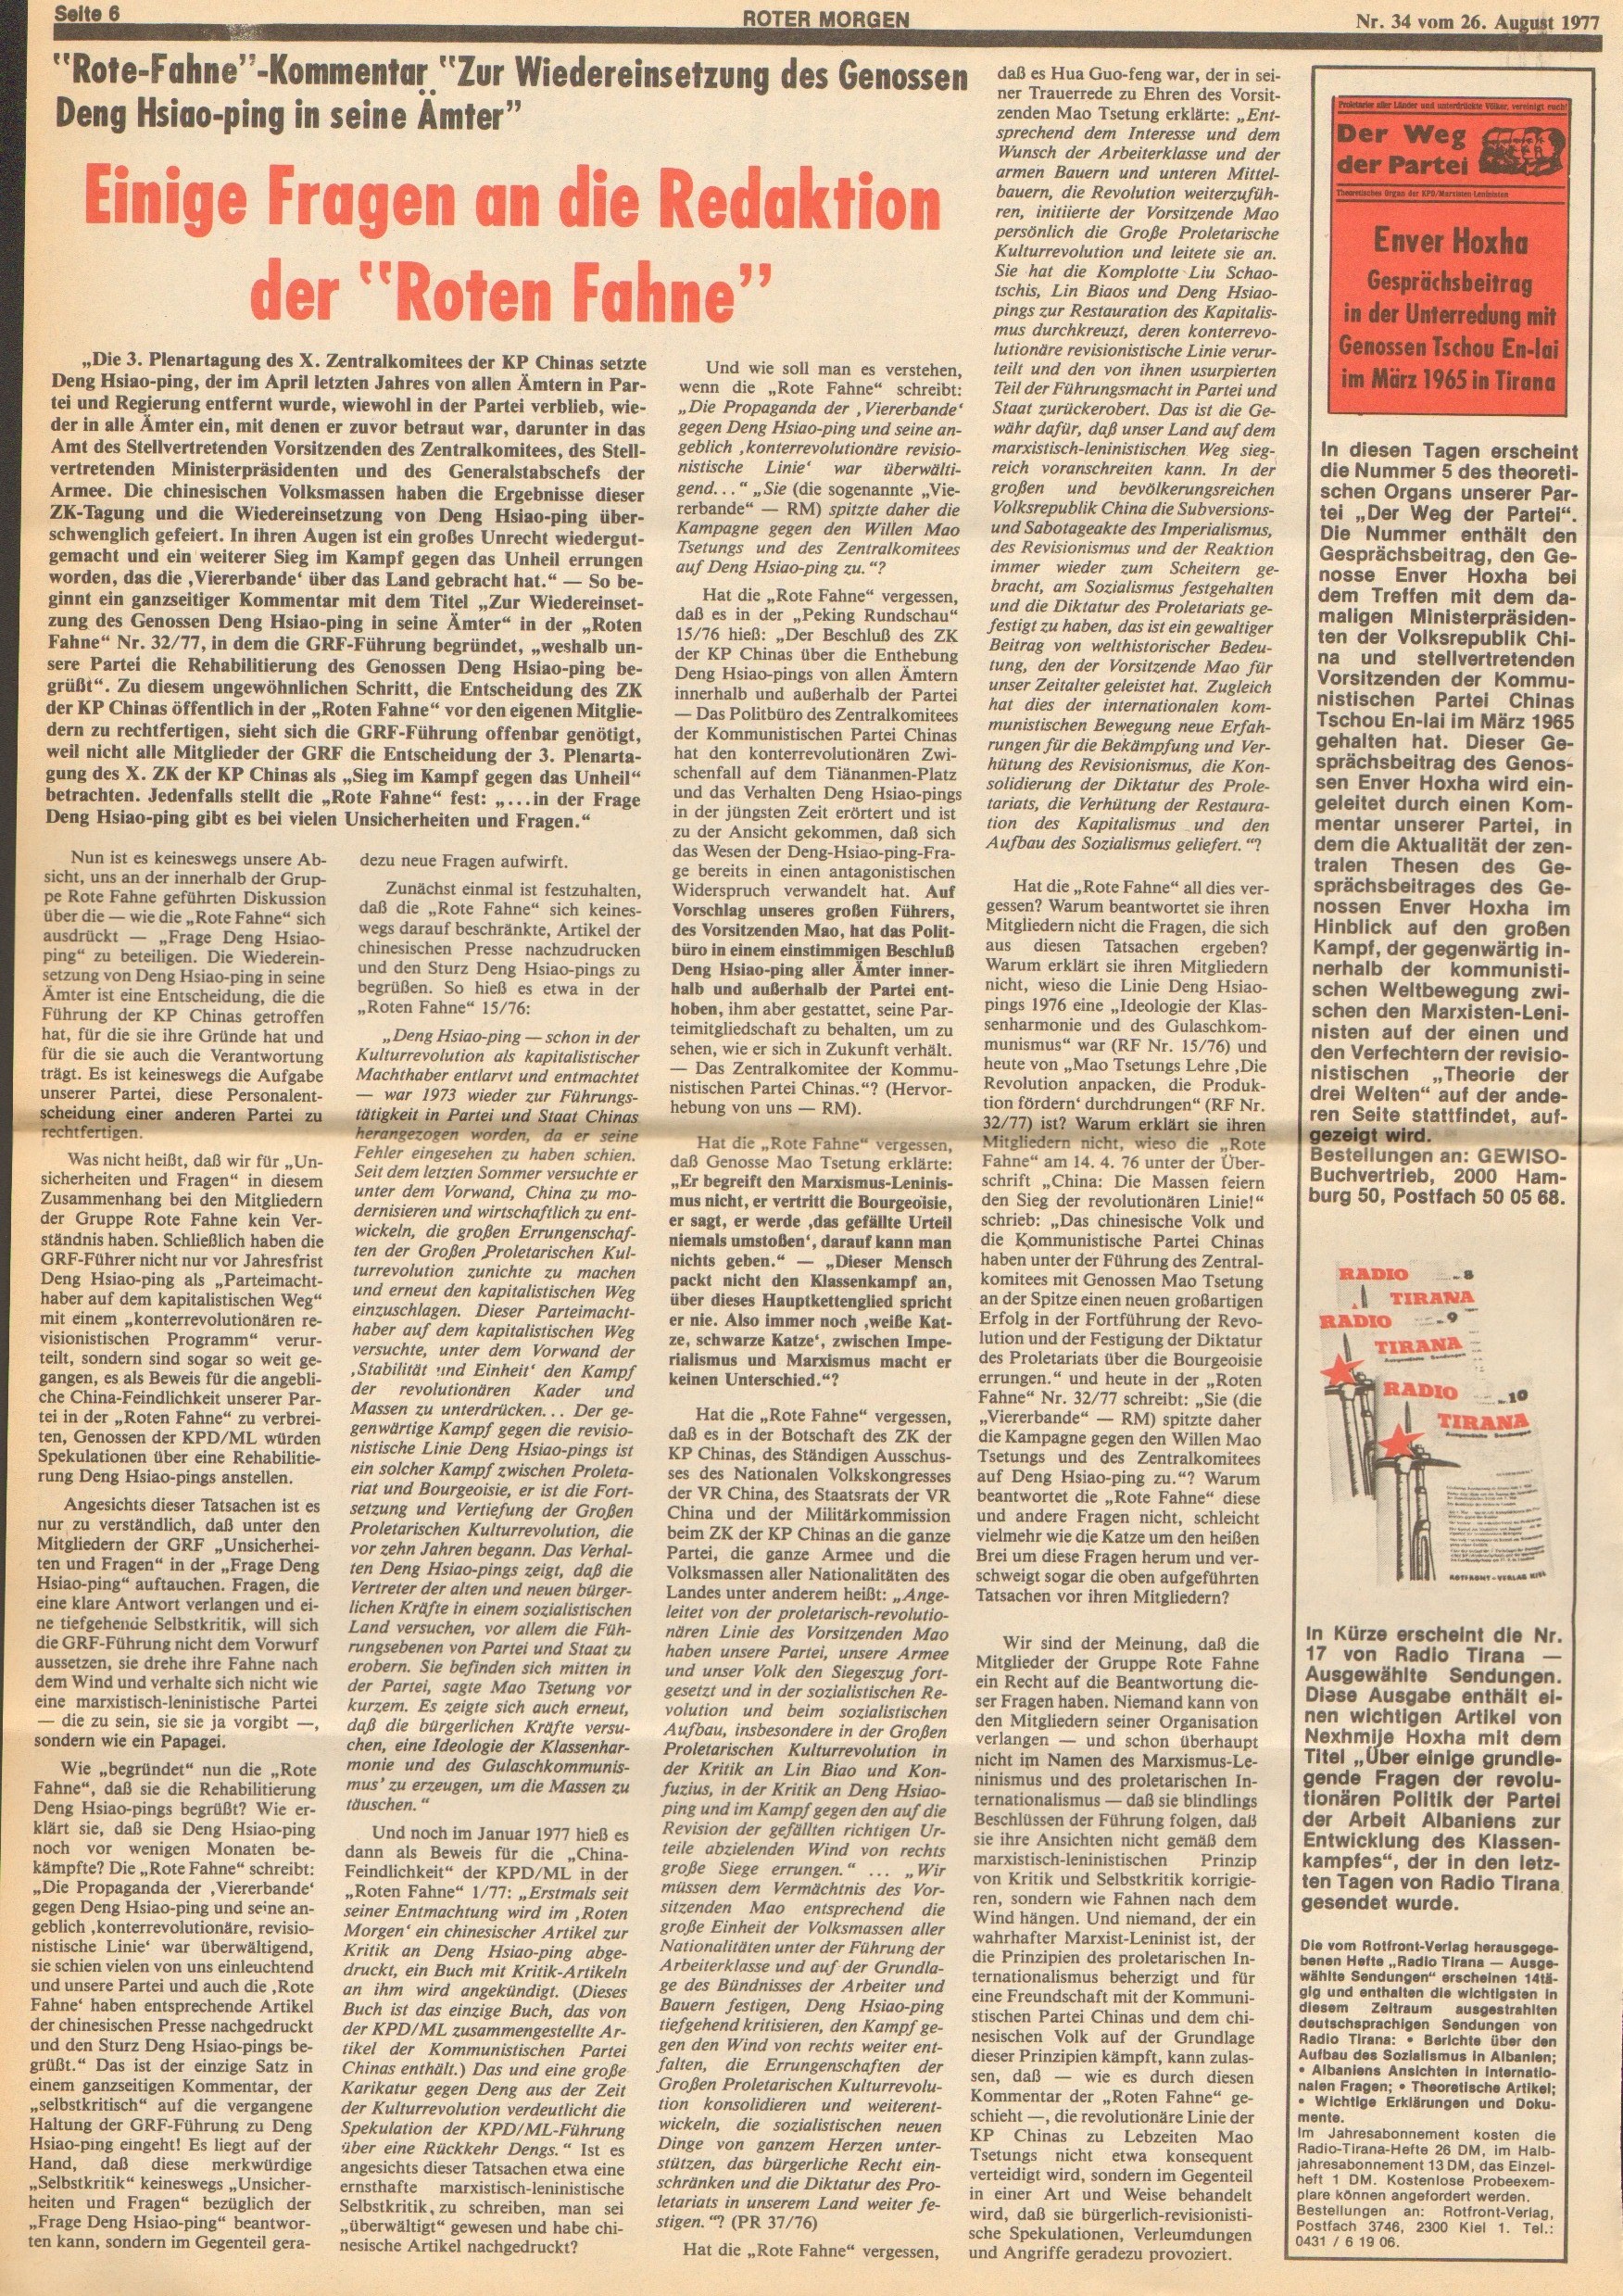 Roter Morgen, 11. Jg., 26. August 1977, Nr. 34, Seite 6